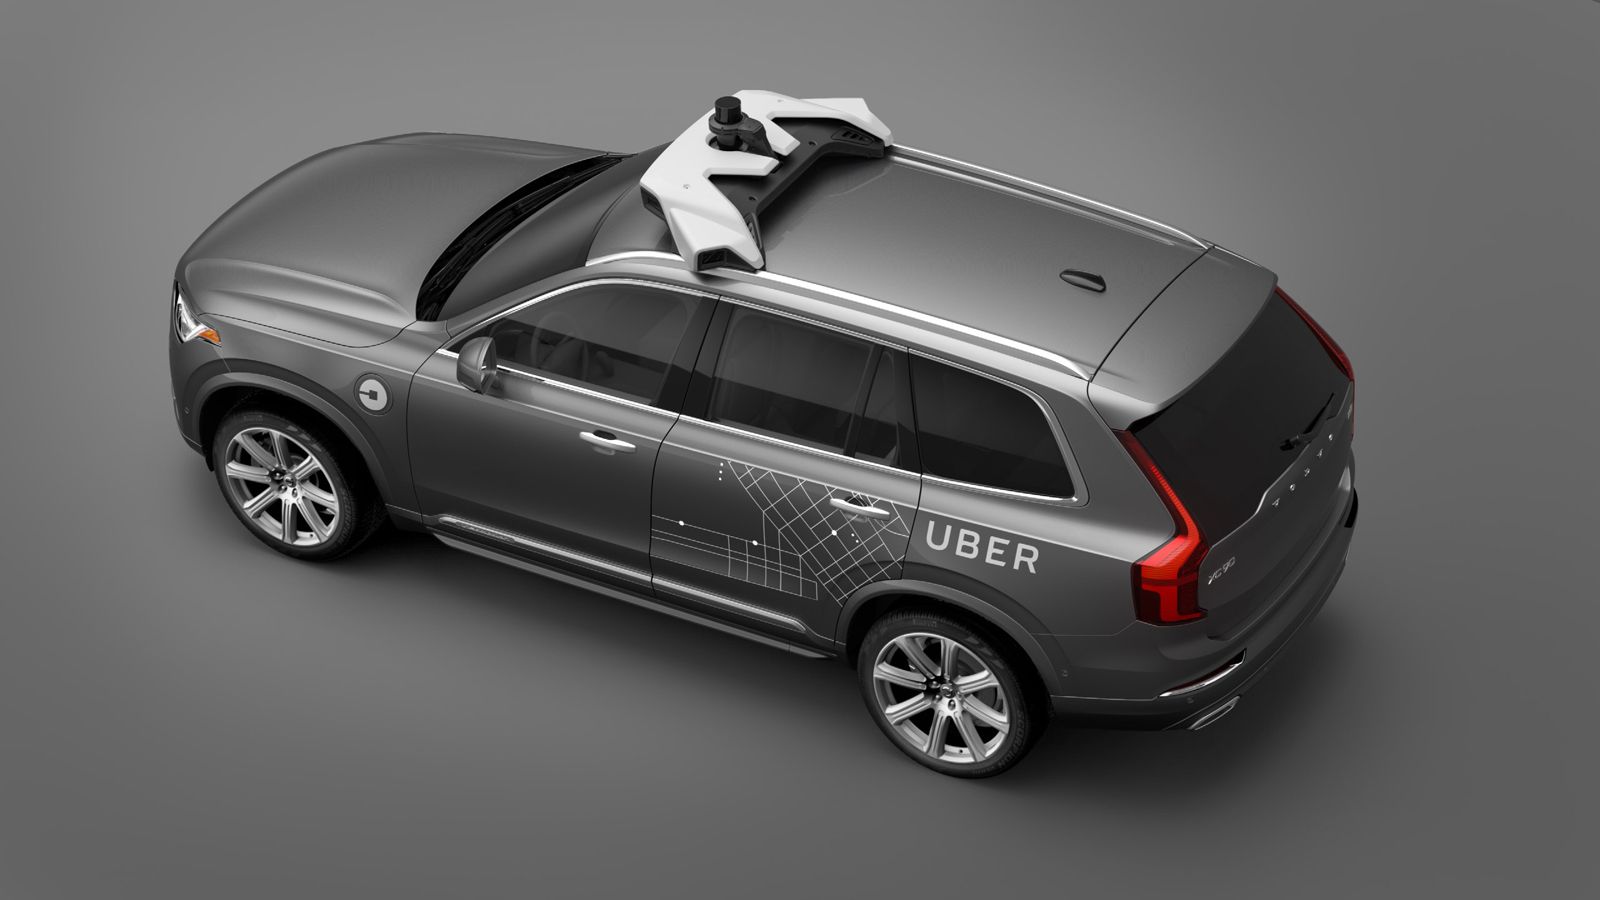 uber and volvo jointly working on autonomous taxis as test fleet arrives in pittsburgh image 2